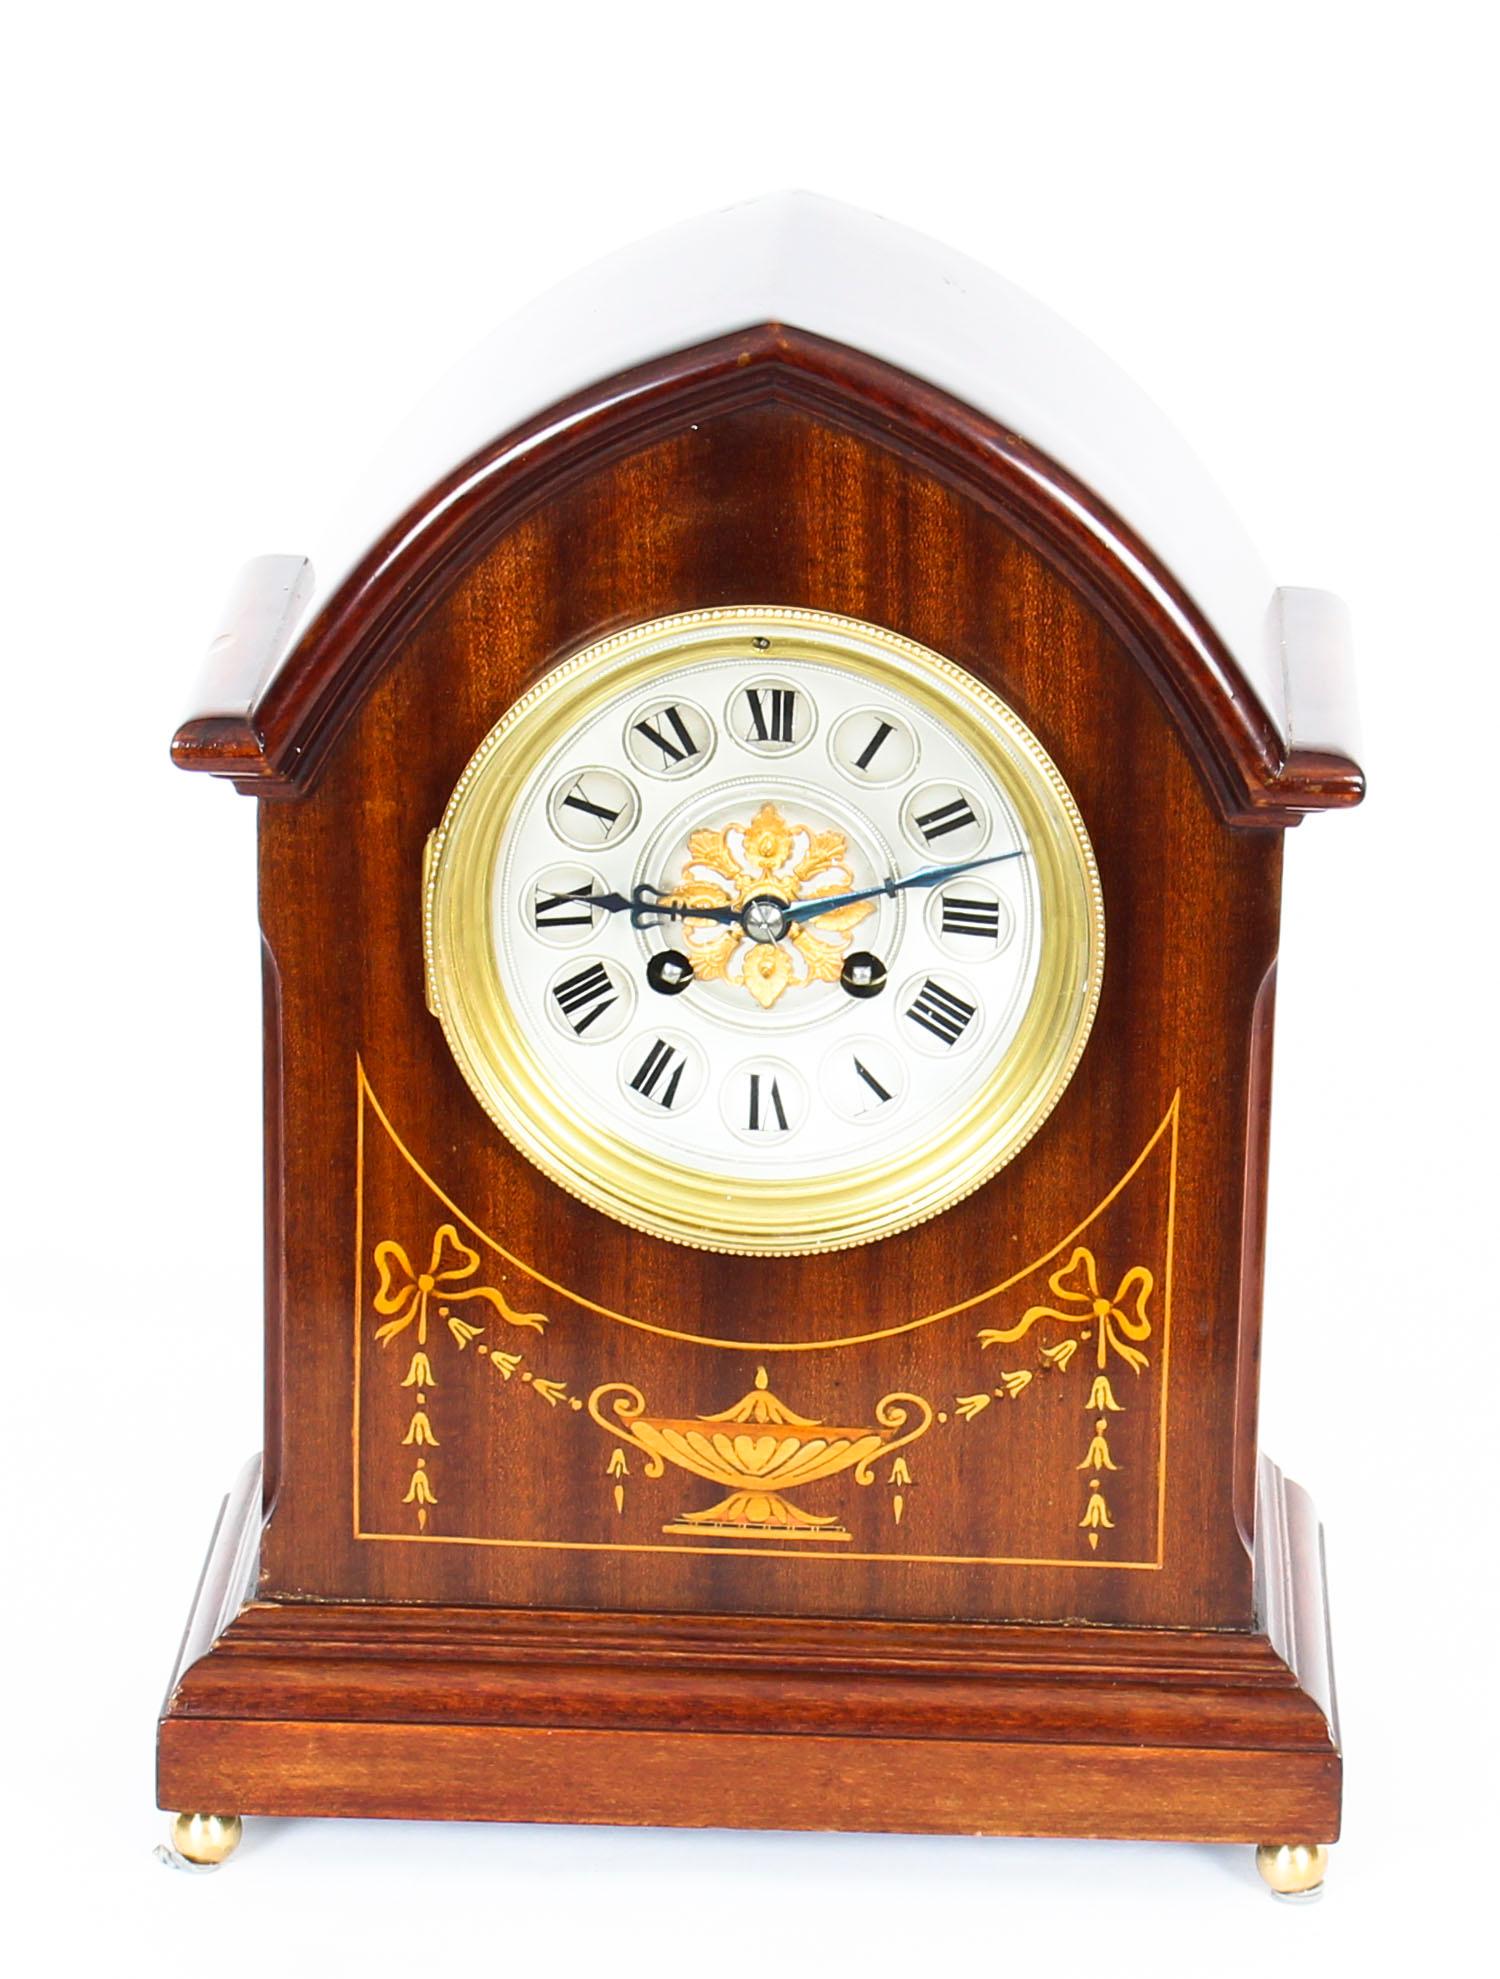 A delightful French Marquetry inlaid mahogany lancet-top mantel clock, circa 1900 in date.

With brass and silvered concave dial, Roman chapter ring and gilt rosette center fronting an eight-day spring driven French movement with gong